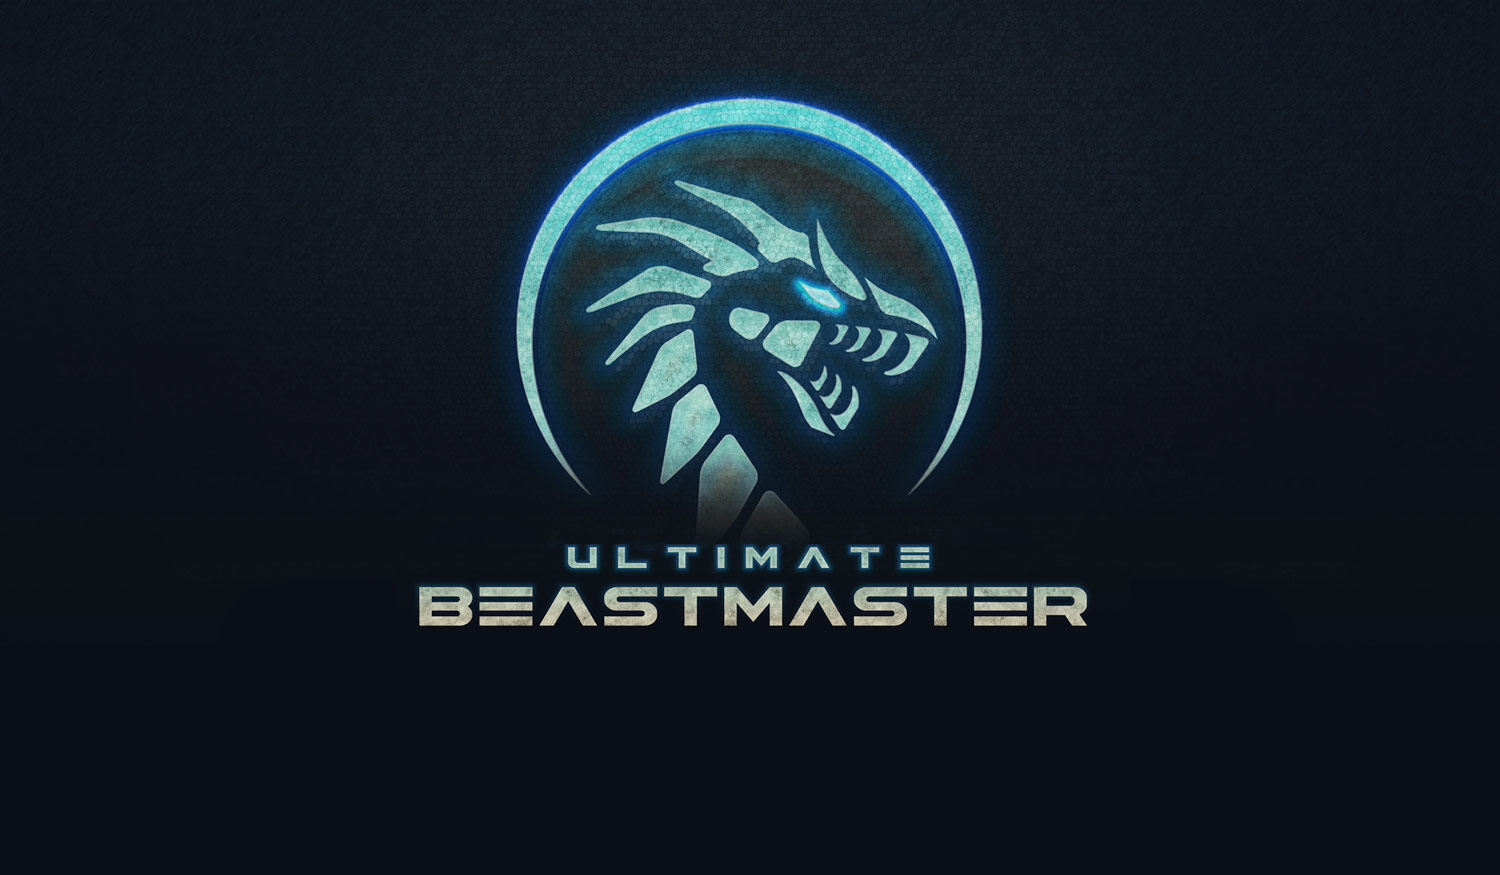 [NEWS] BOOM SOUNDS IN NETFLIX SERIES "ULTIMATE BEASTMASTER"